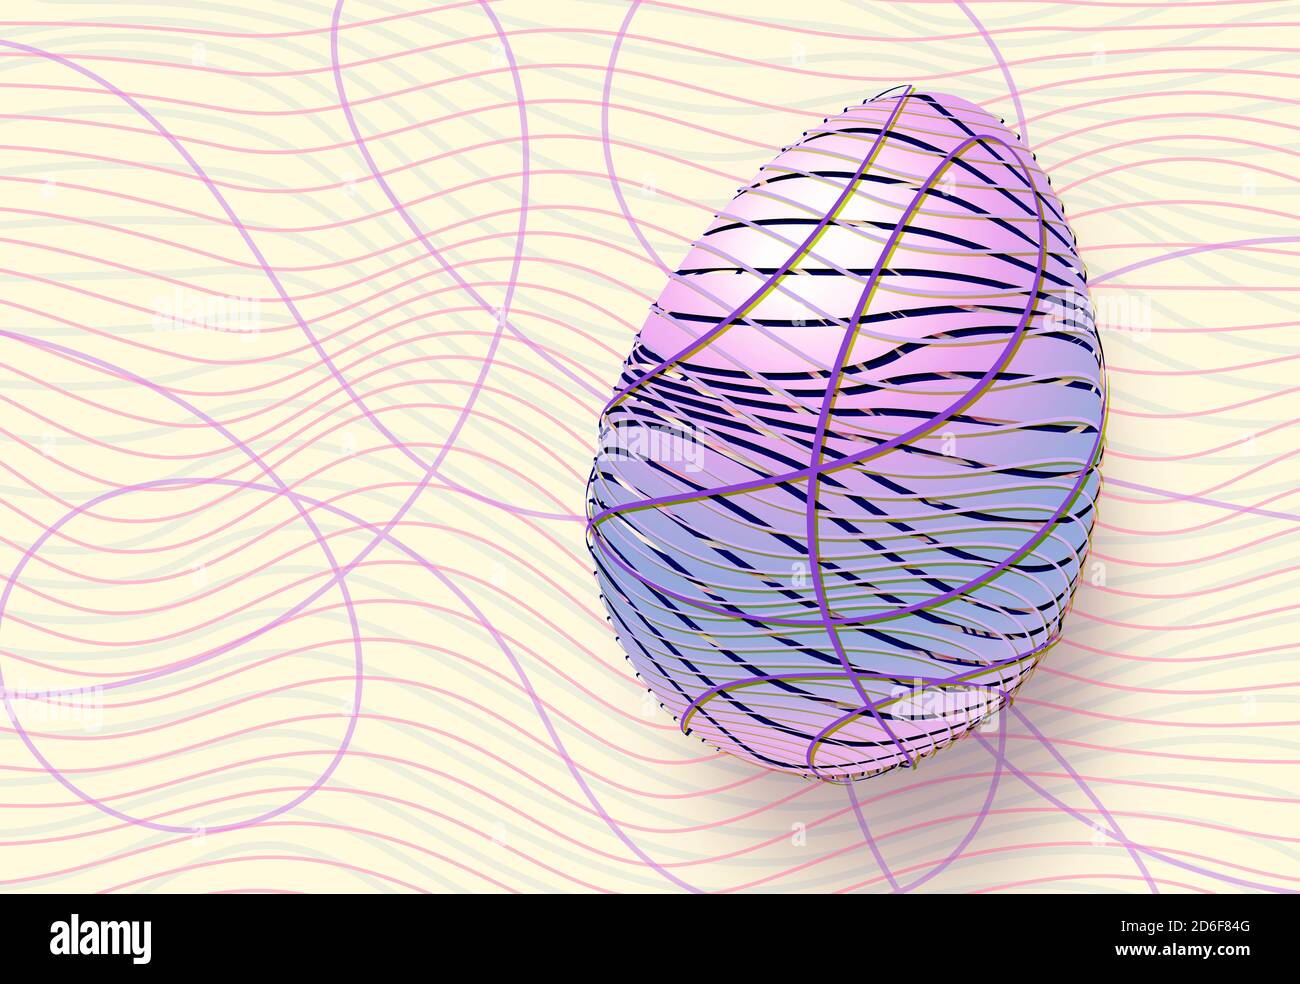 Purple Easter egg formed from colored strips, against a light background with curved lines Stock Photo